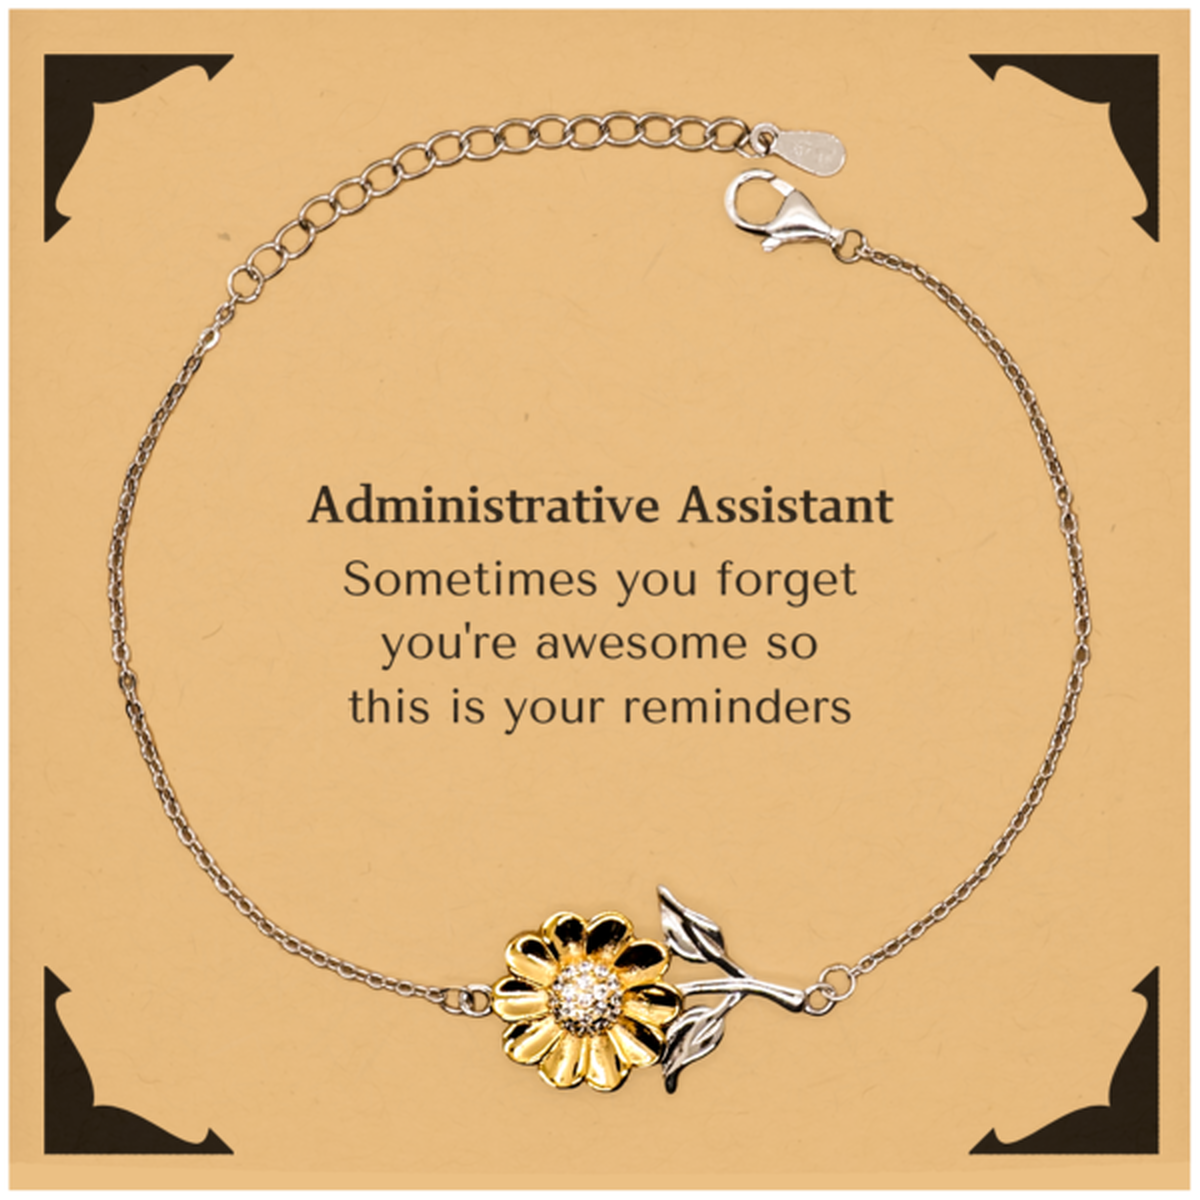 Sentimental Administrative Assistant Sunflower Bracelet, Administrative Assistant Sometimes you forget you're awesome so this is your reminders, Graduation Christmas Birthday Gifts for Administrative Assistant, Men, Women, Coworkers